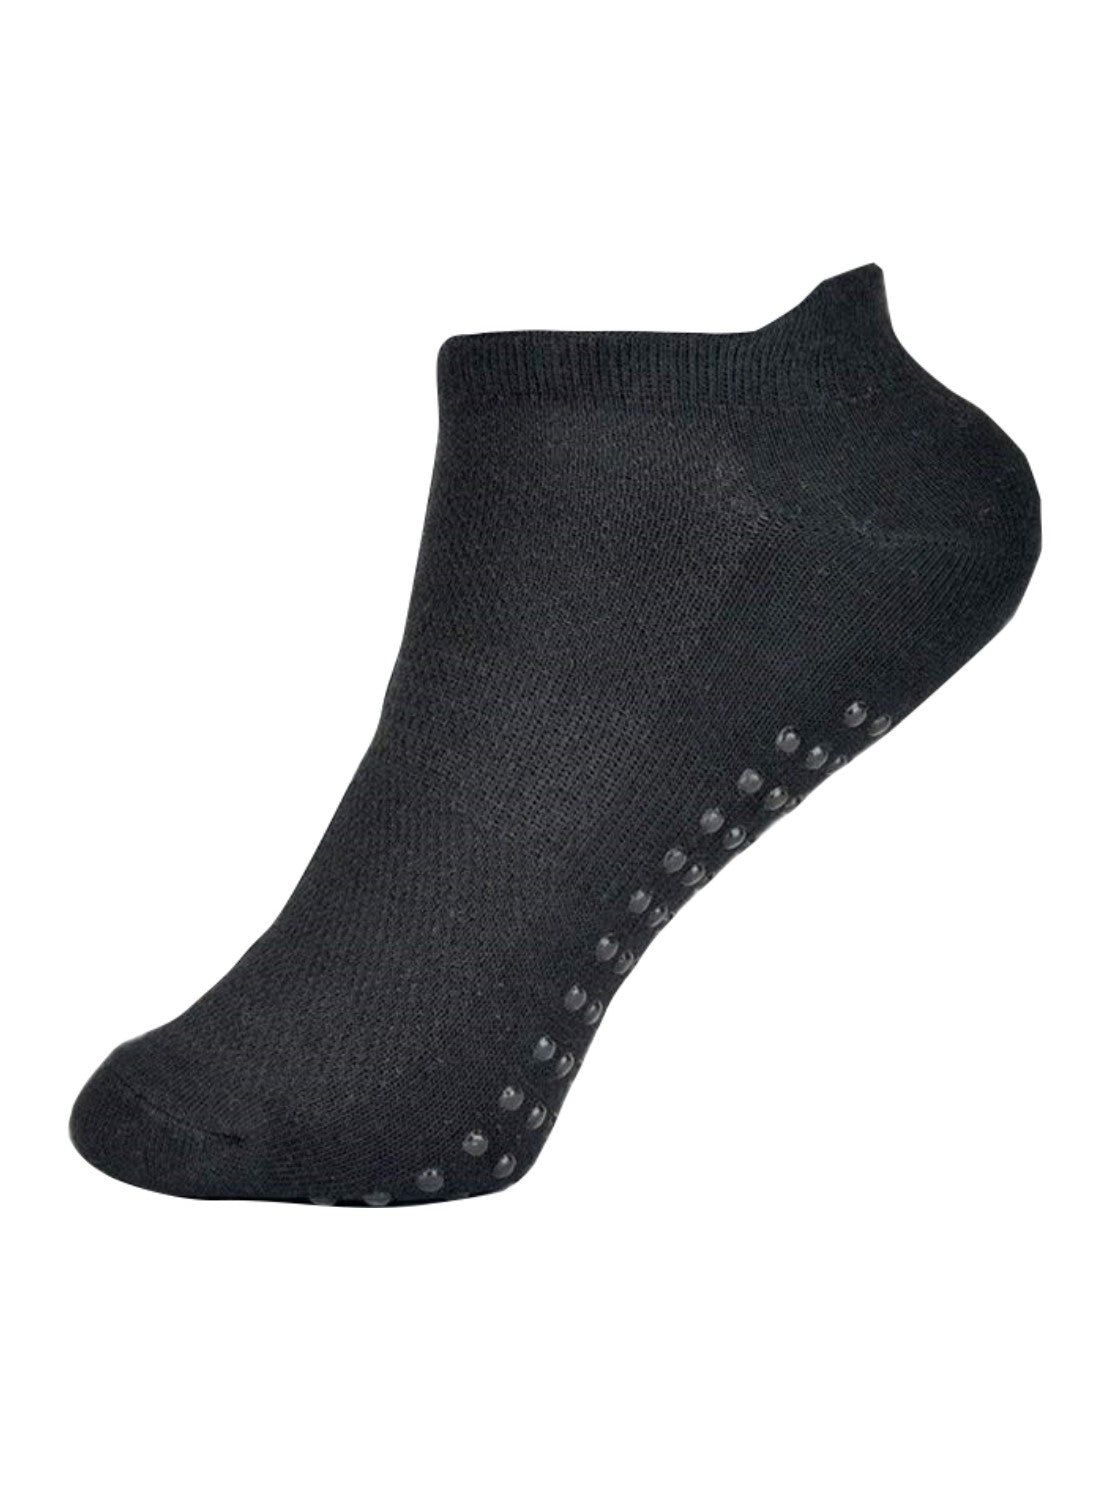 6 Pairs Girls' Cotton-Rich Black Trainer Socks with Sole Grippers (9-12)